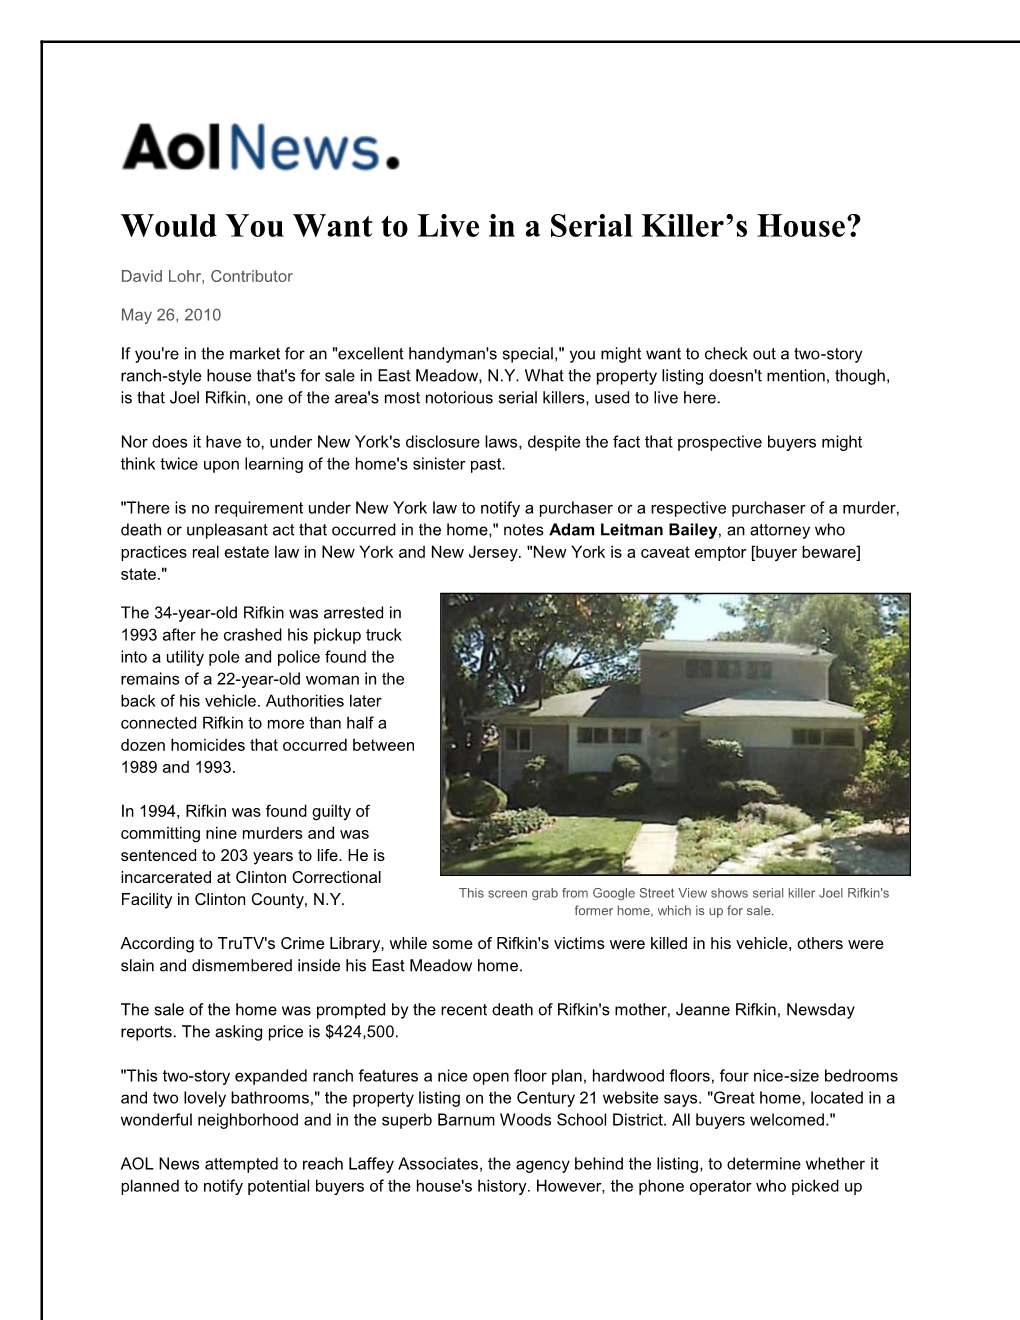 Would You Want to Live in a Serial Killer's House?